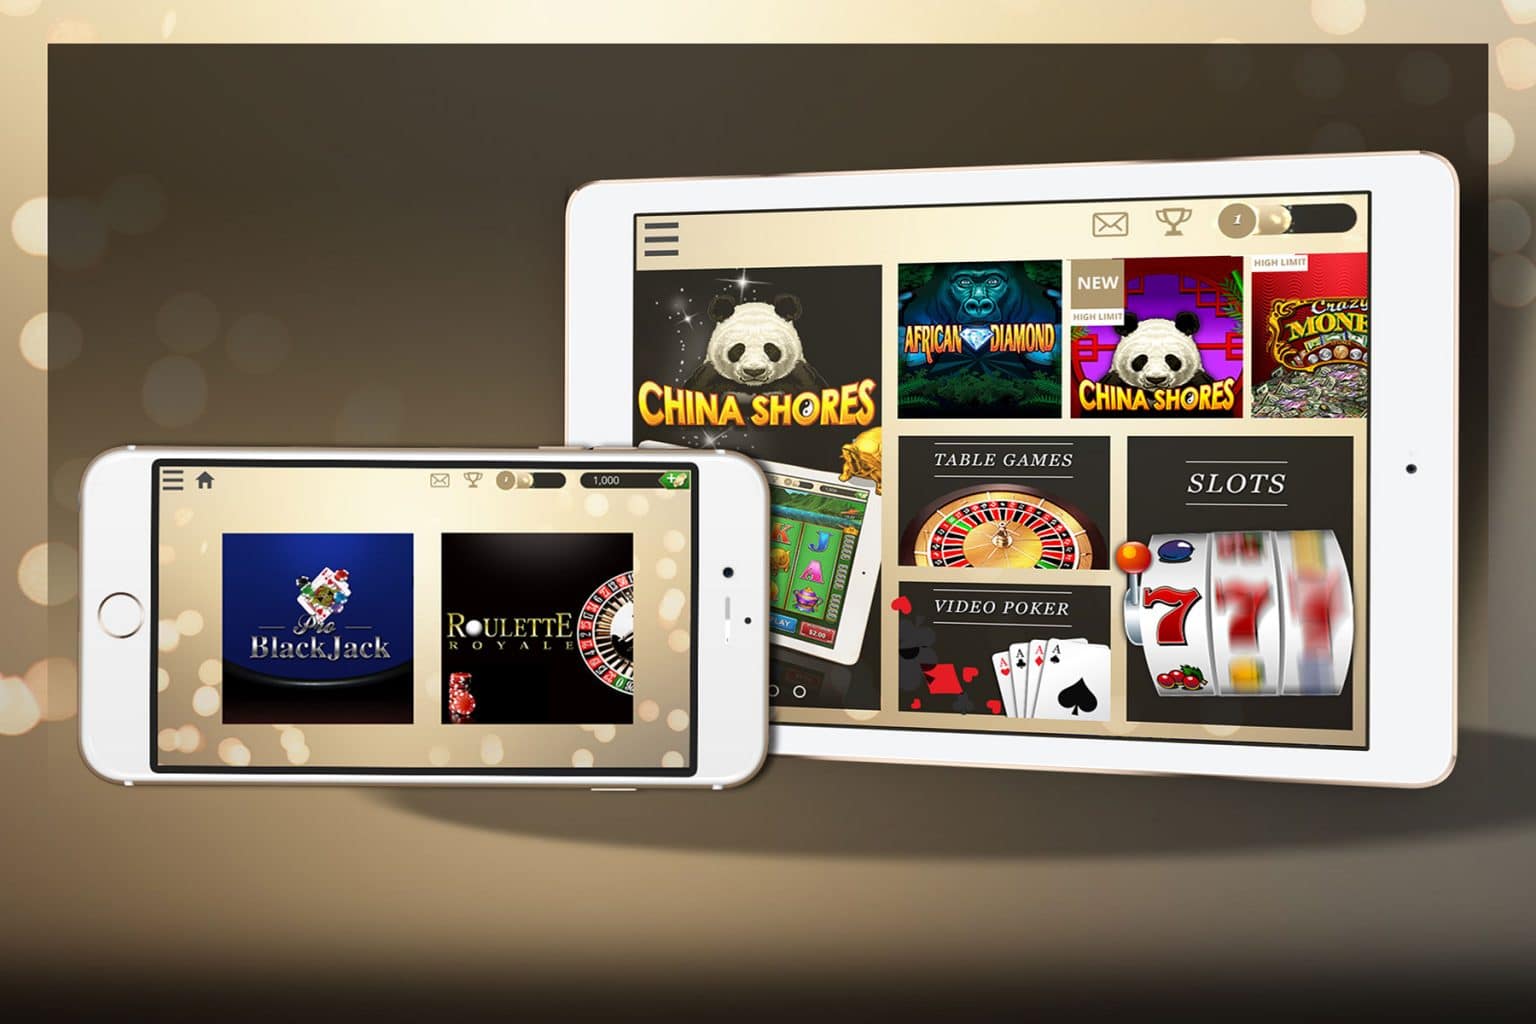 instal the new version for windows Turning Stone Online Casino